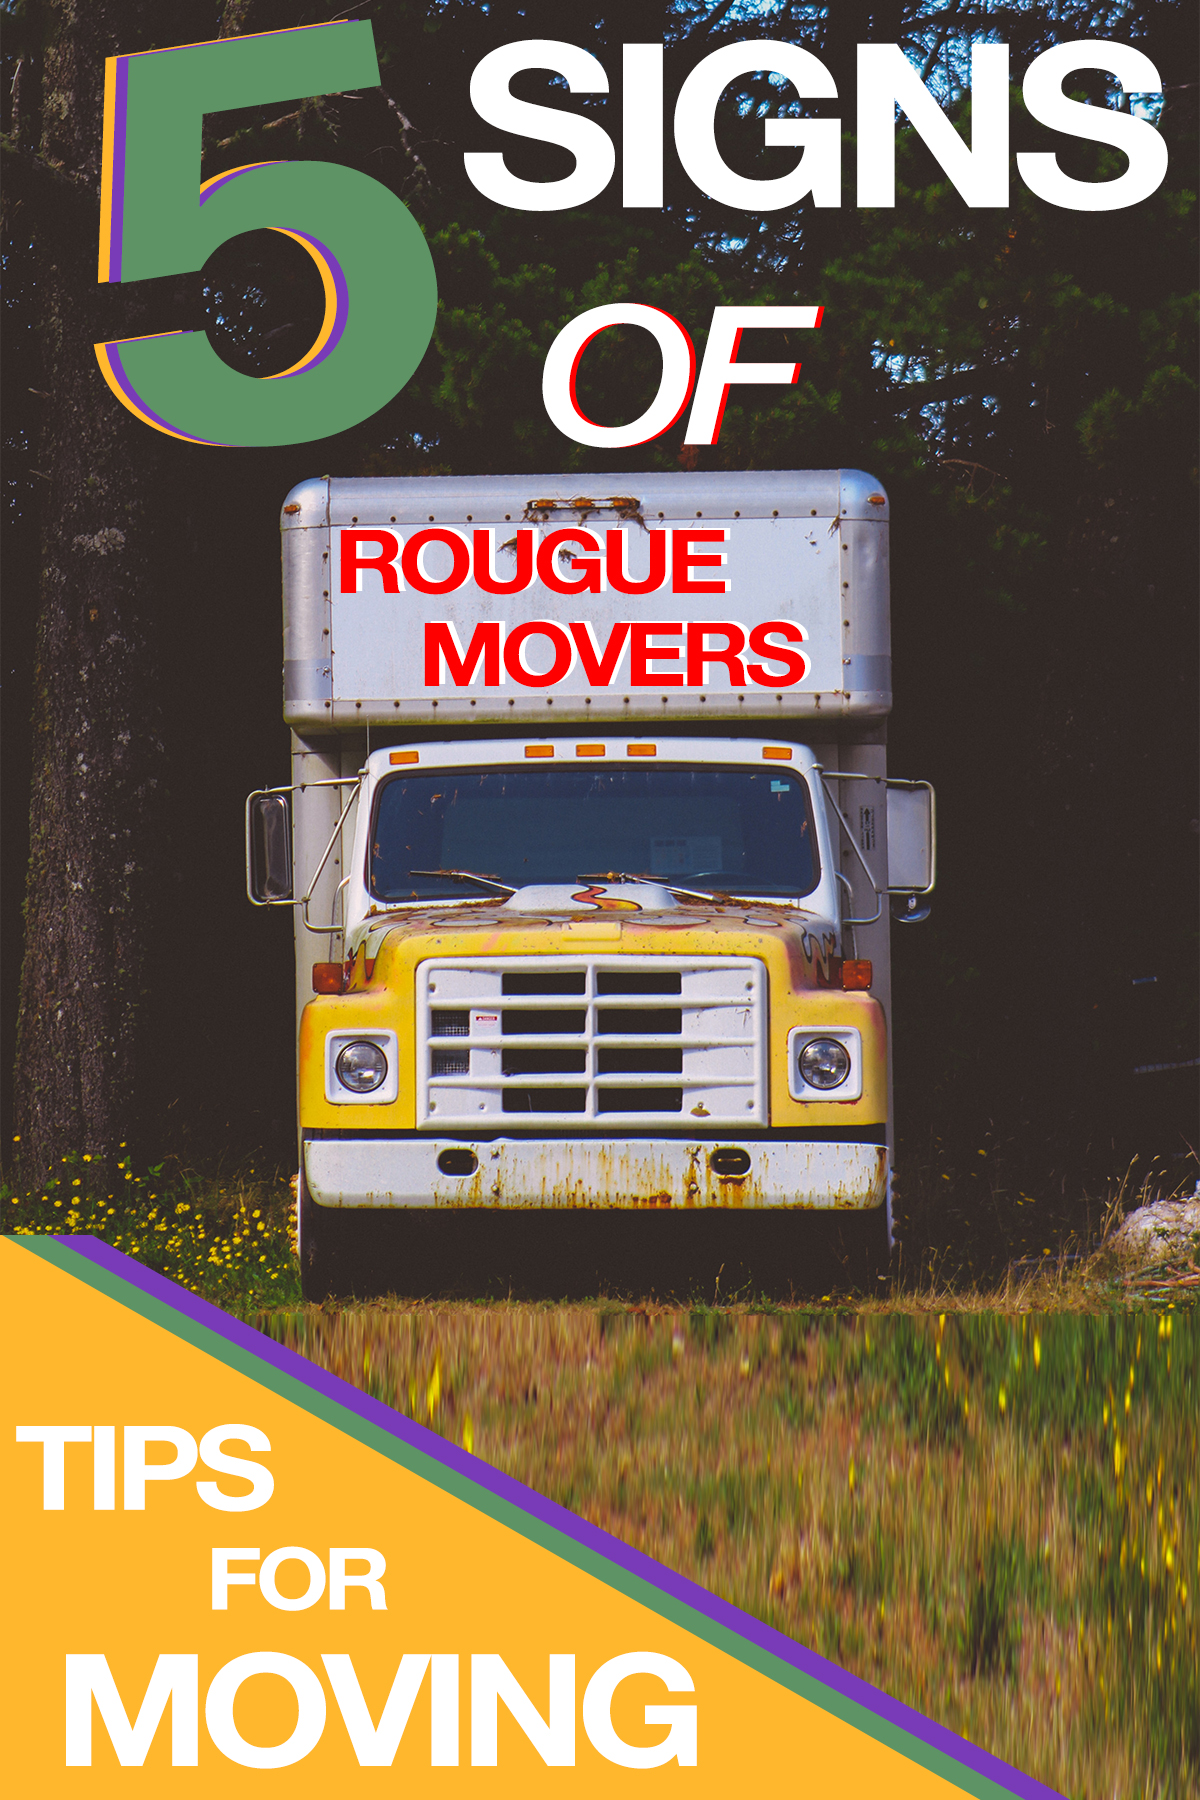 Best Movers League Blog - Moving Tips - 5 signs you are hiring rogue movers